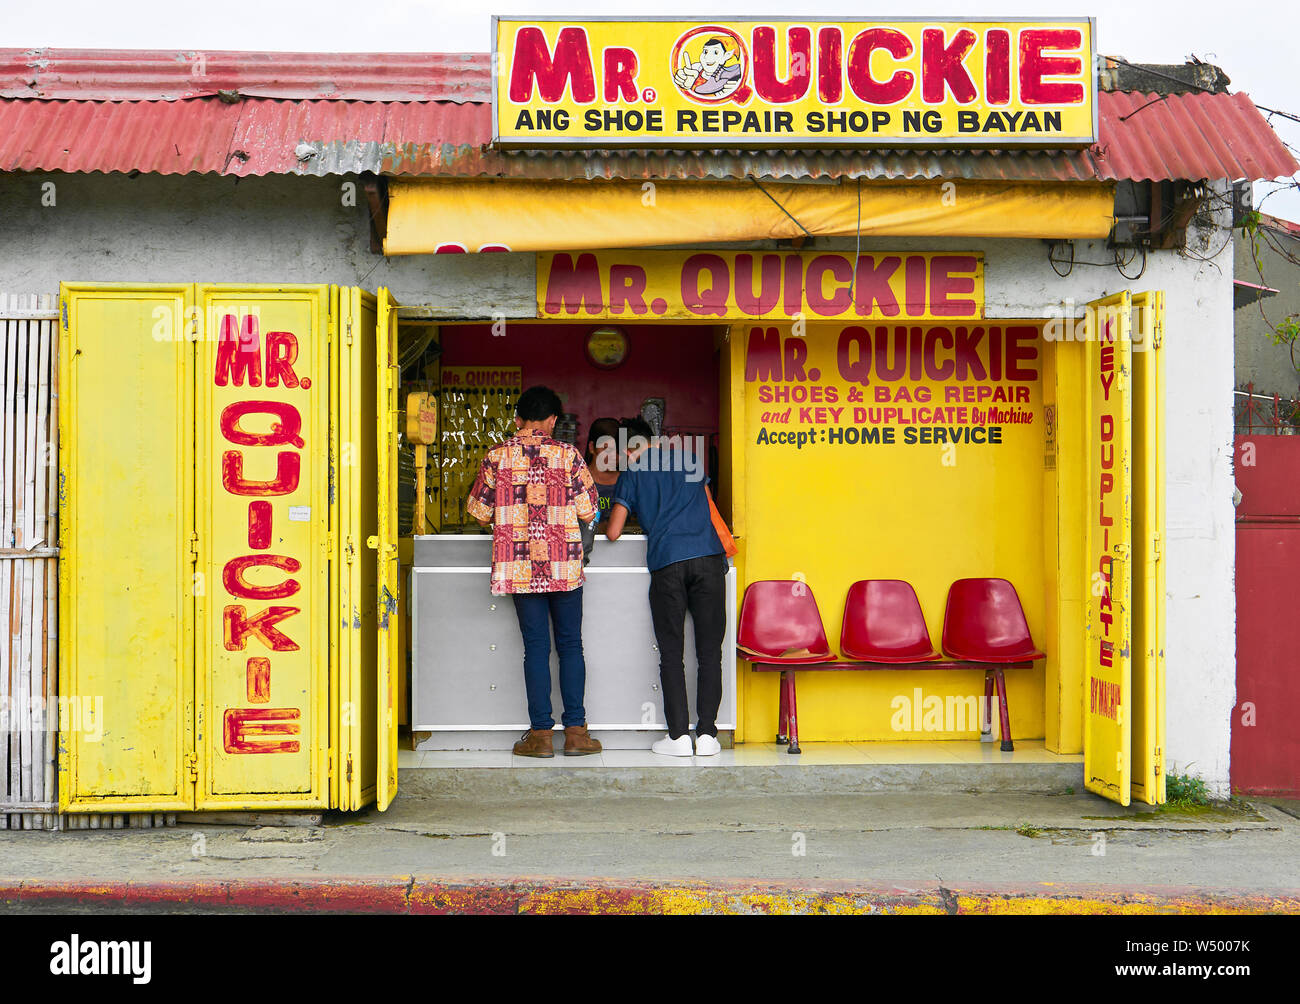 Roxas City, Capiz Province, Philippines: Young customers in a colorful Mr. Quickie shoe and bag repair and key duplicate shop Stock Photo